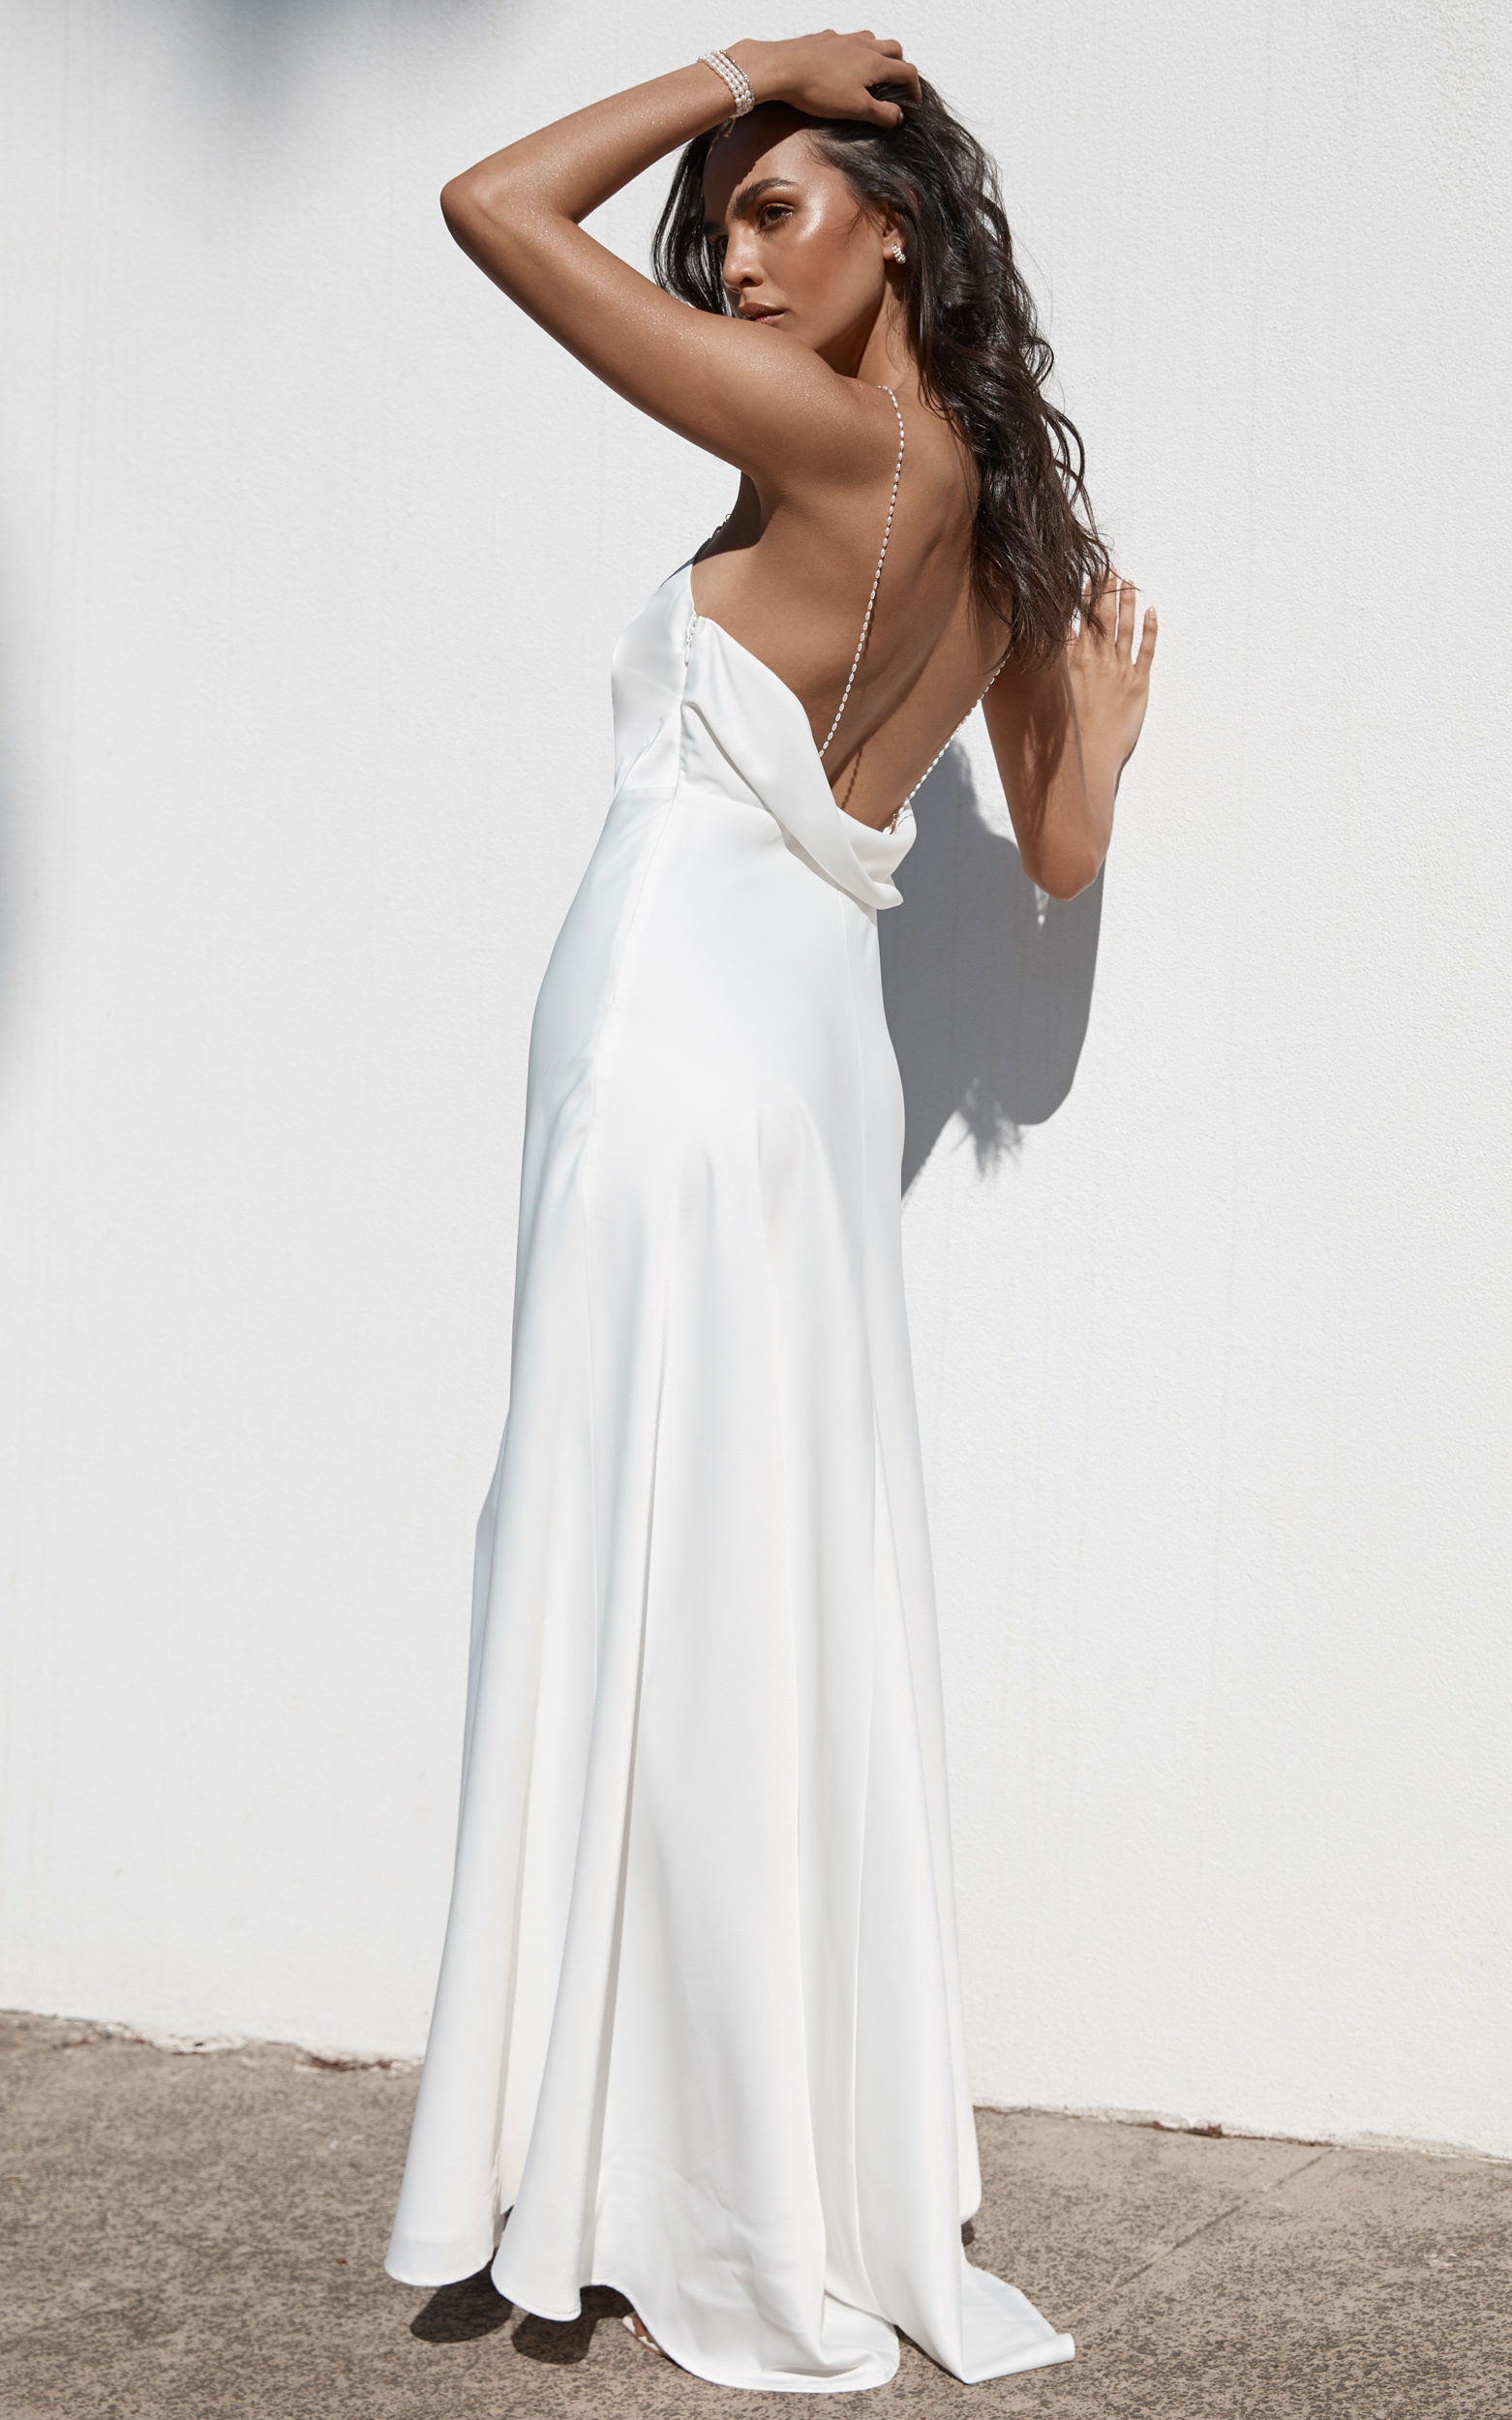 Entwined Dreams Pearl Strap Cowl Back Gown in Ivory - 06, WHT1, hi-res image number null